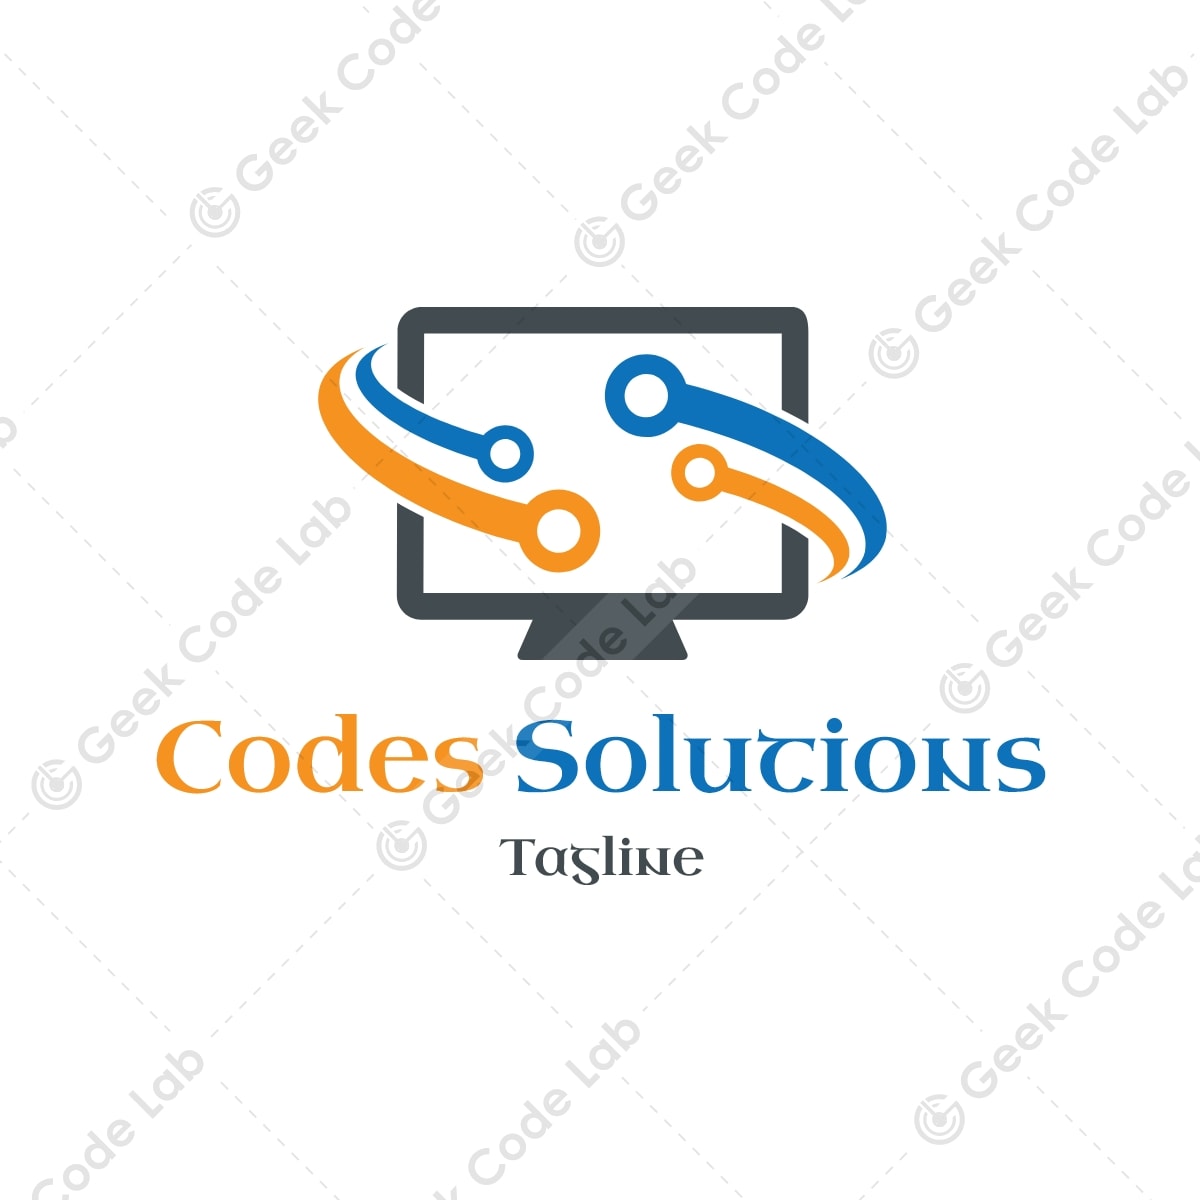 Codes Solutions